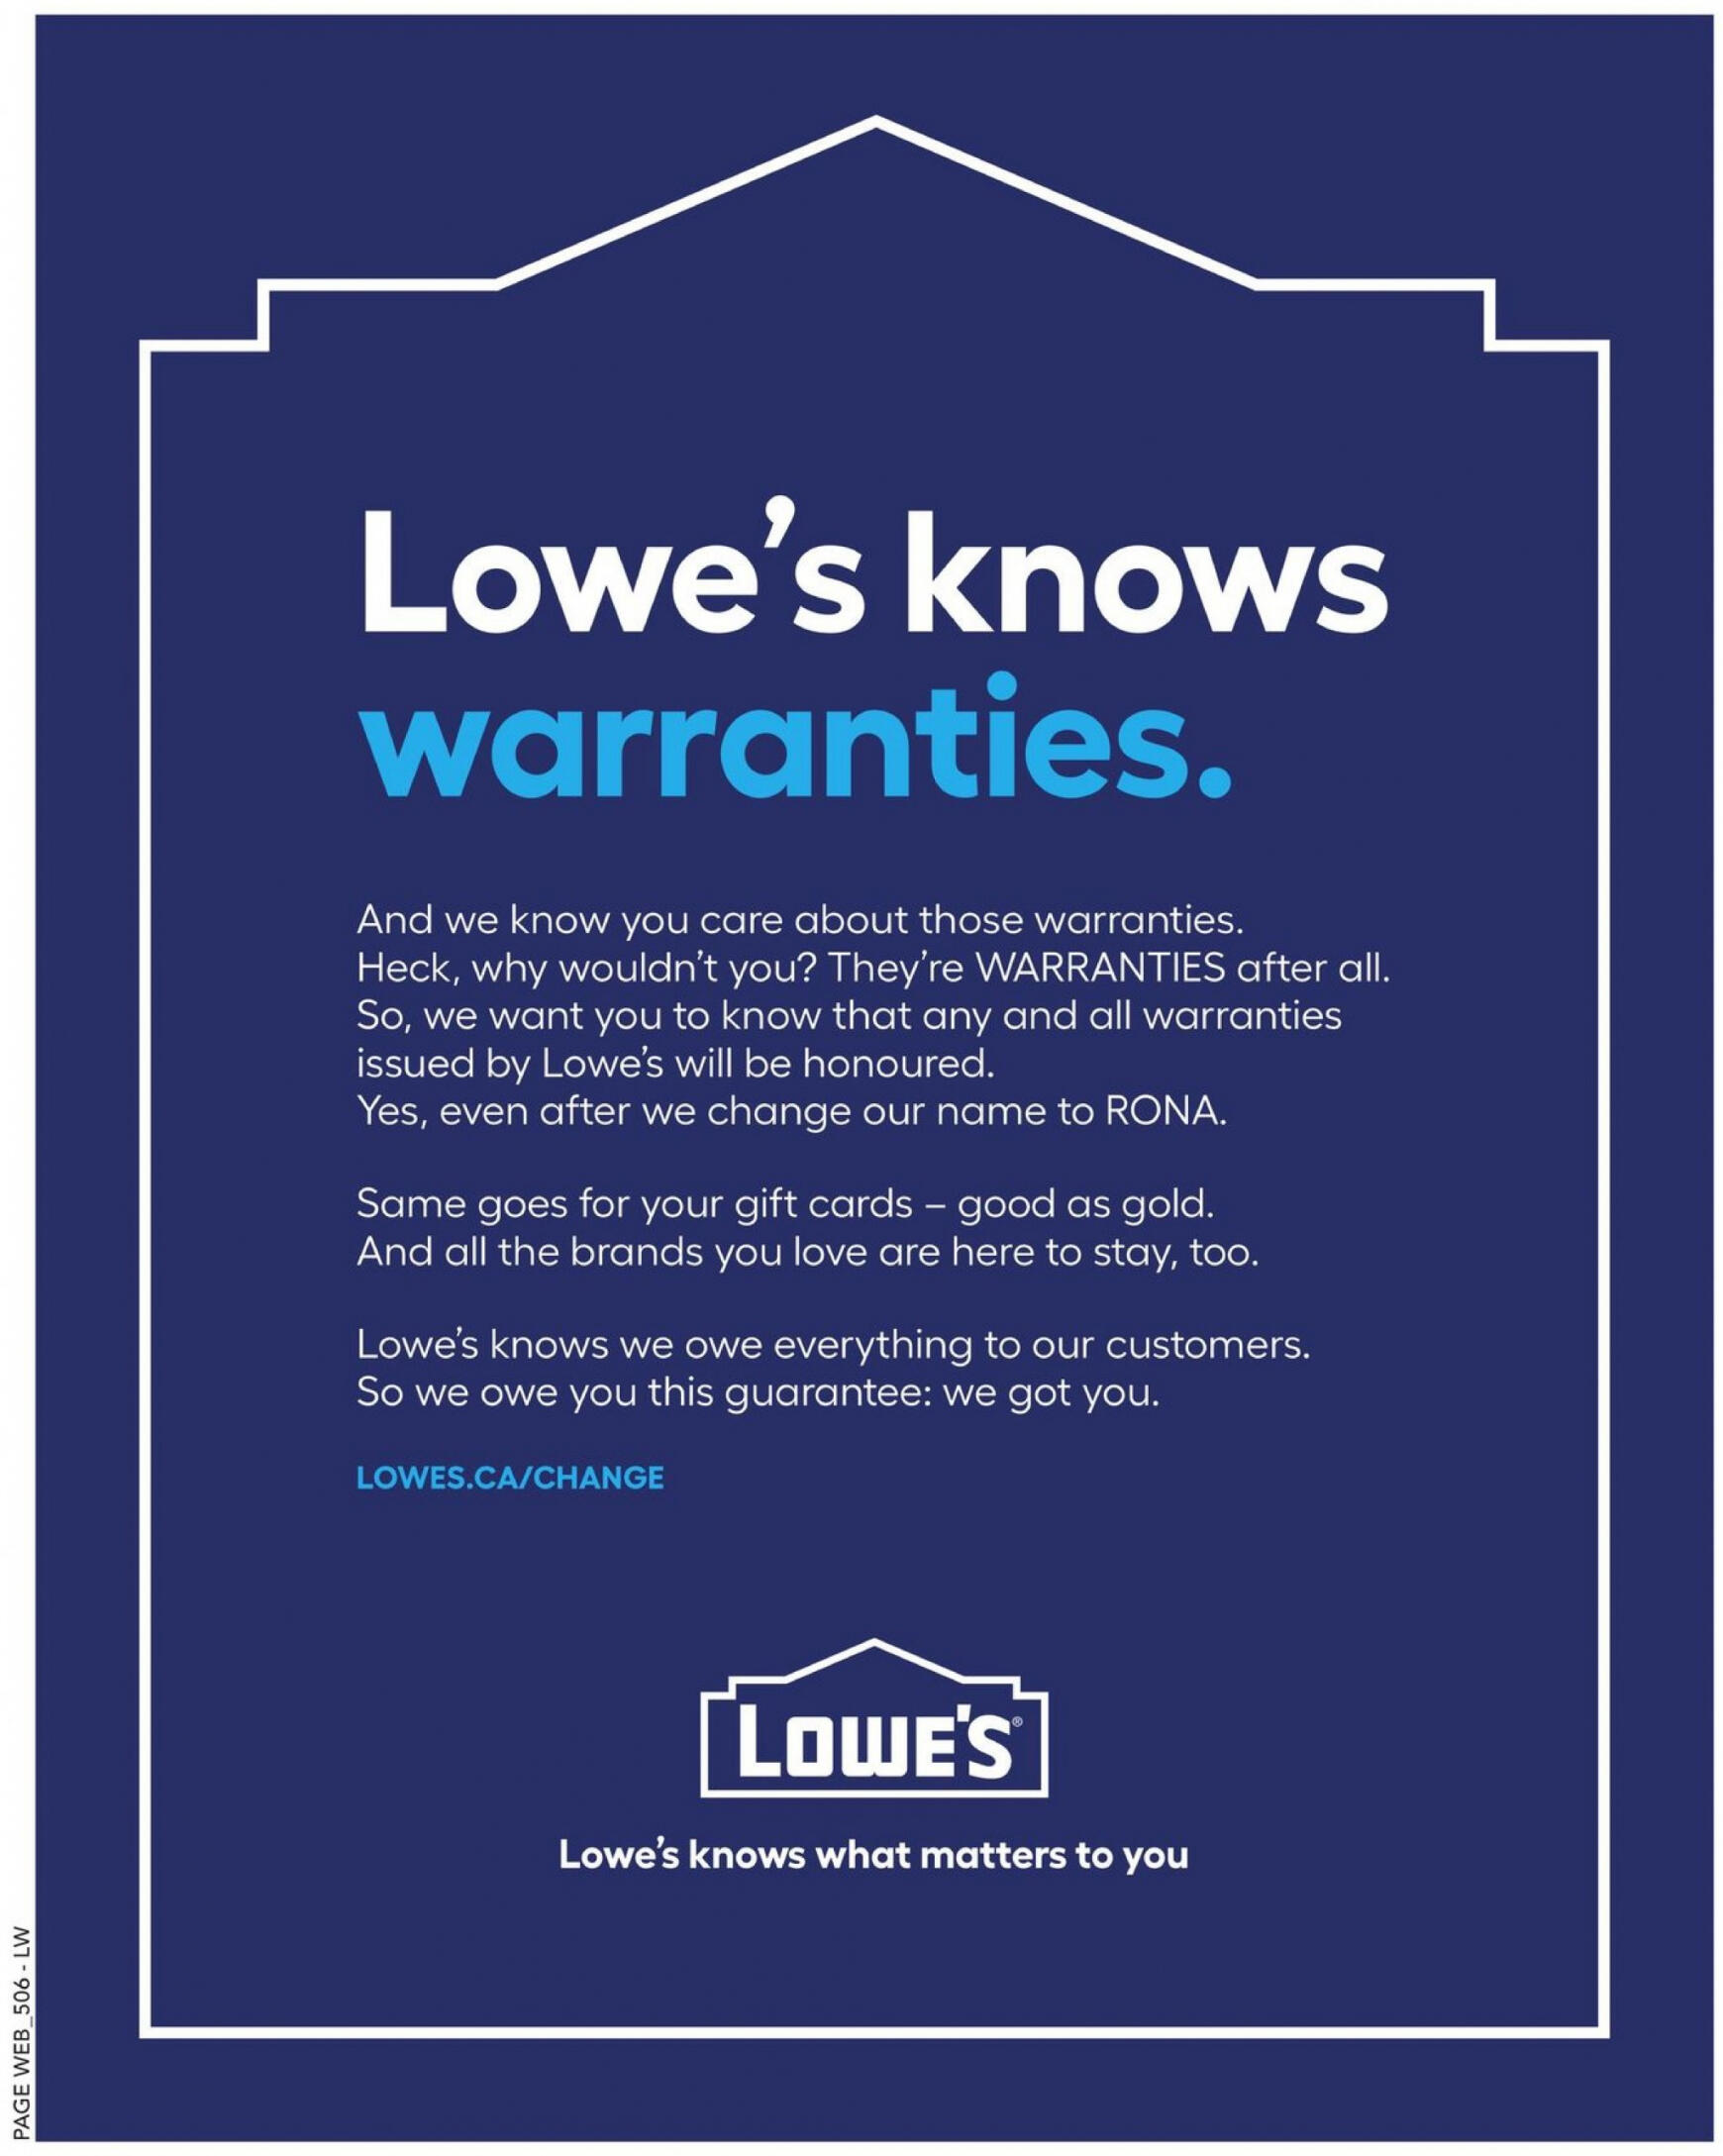 lowes - Lowe's - page: 13